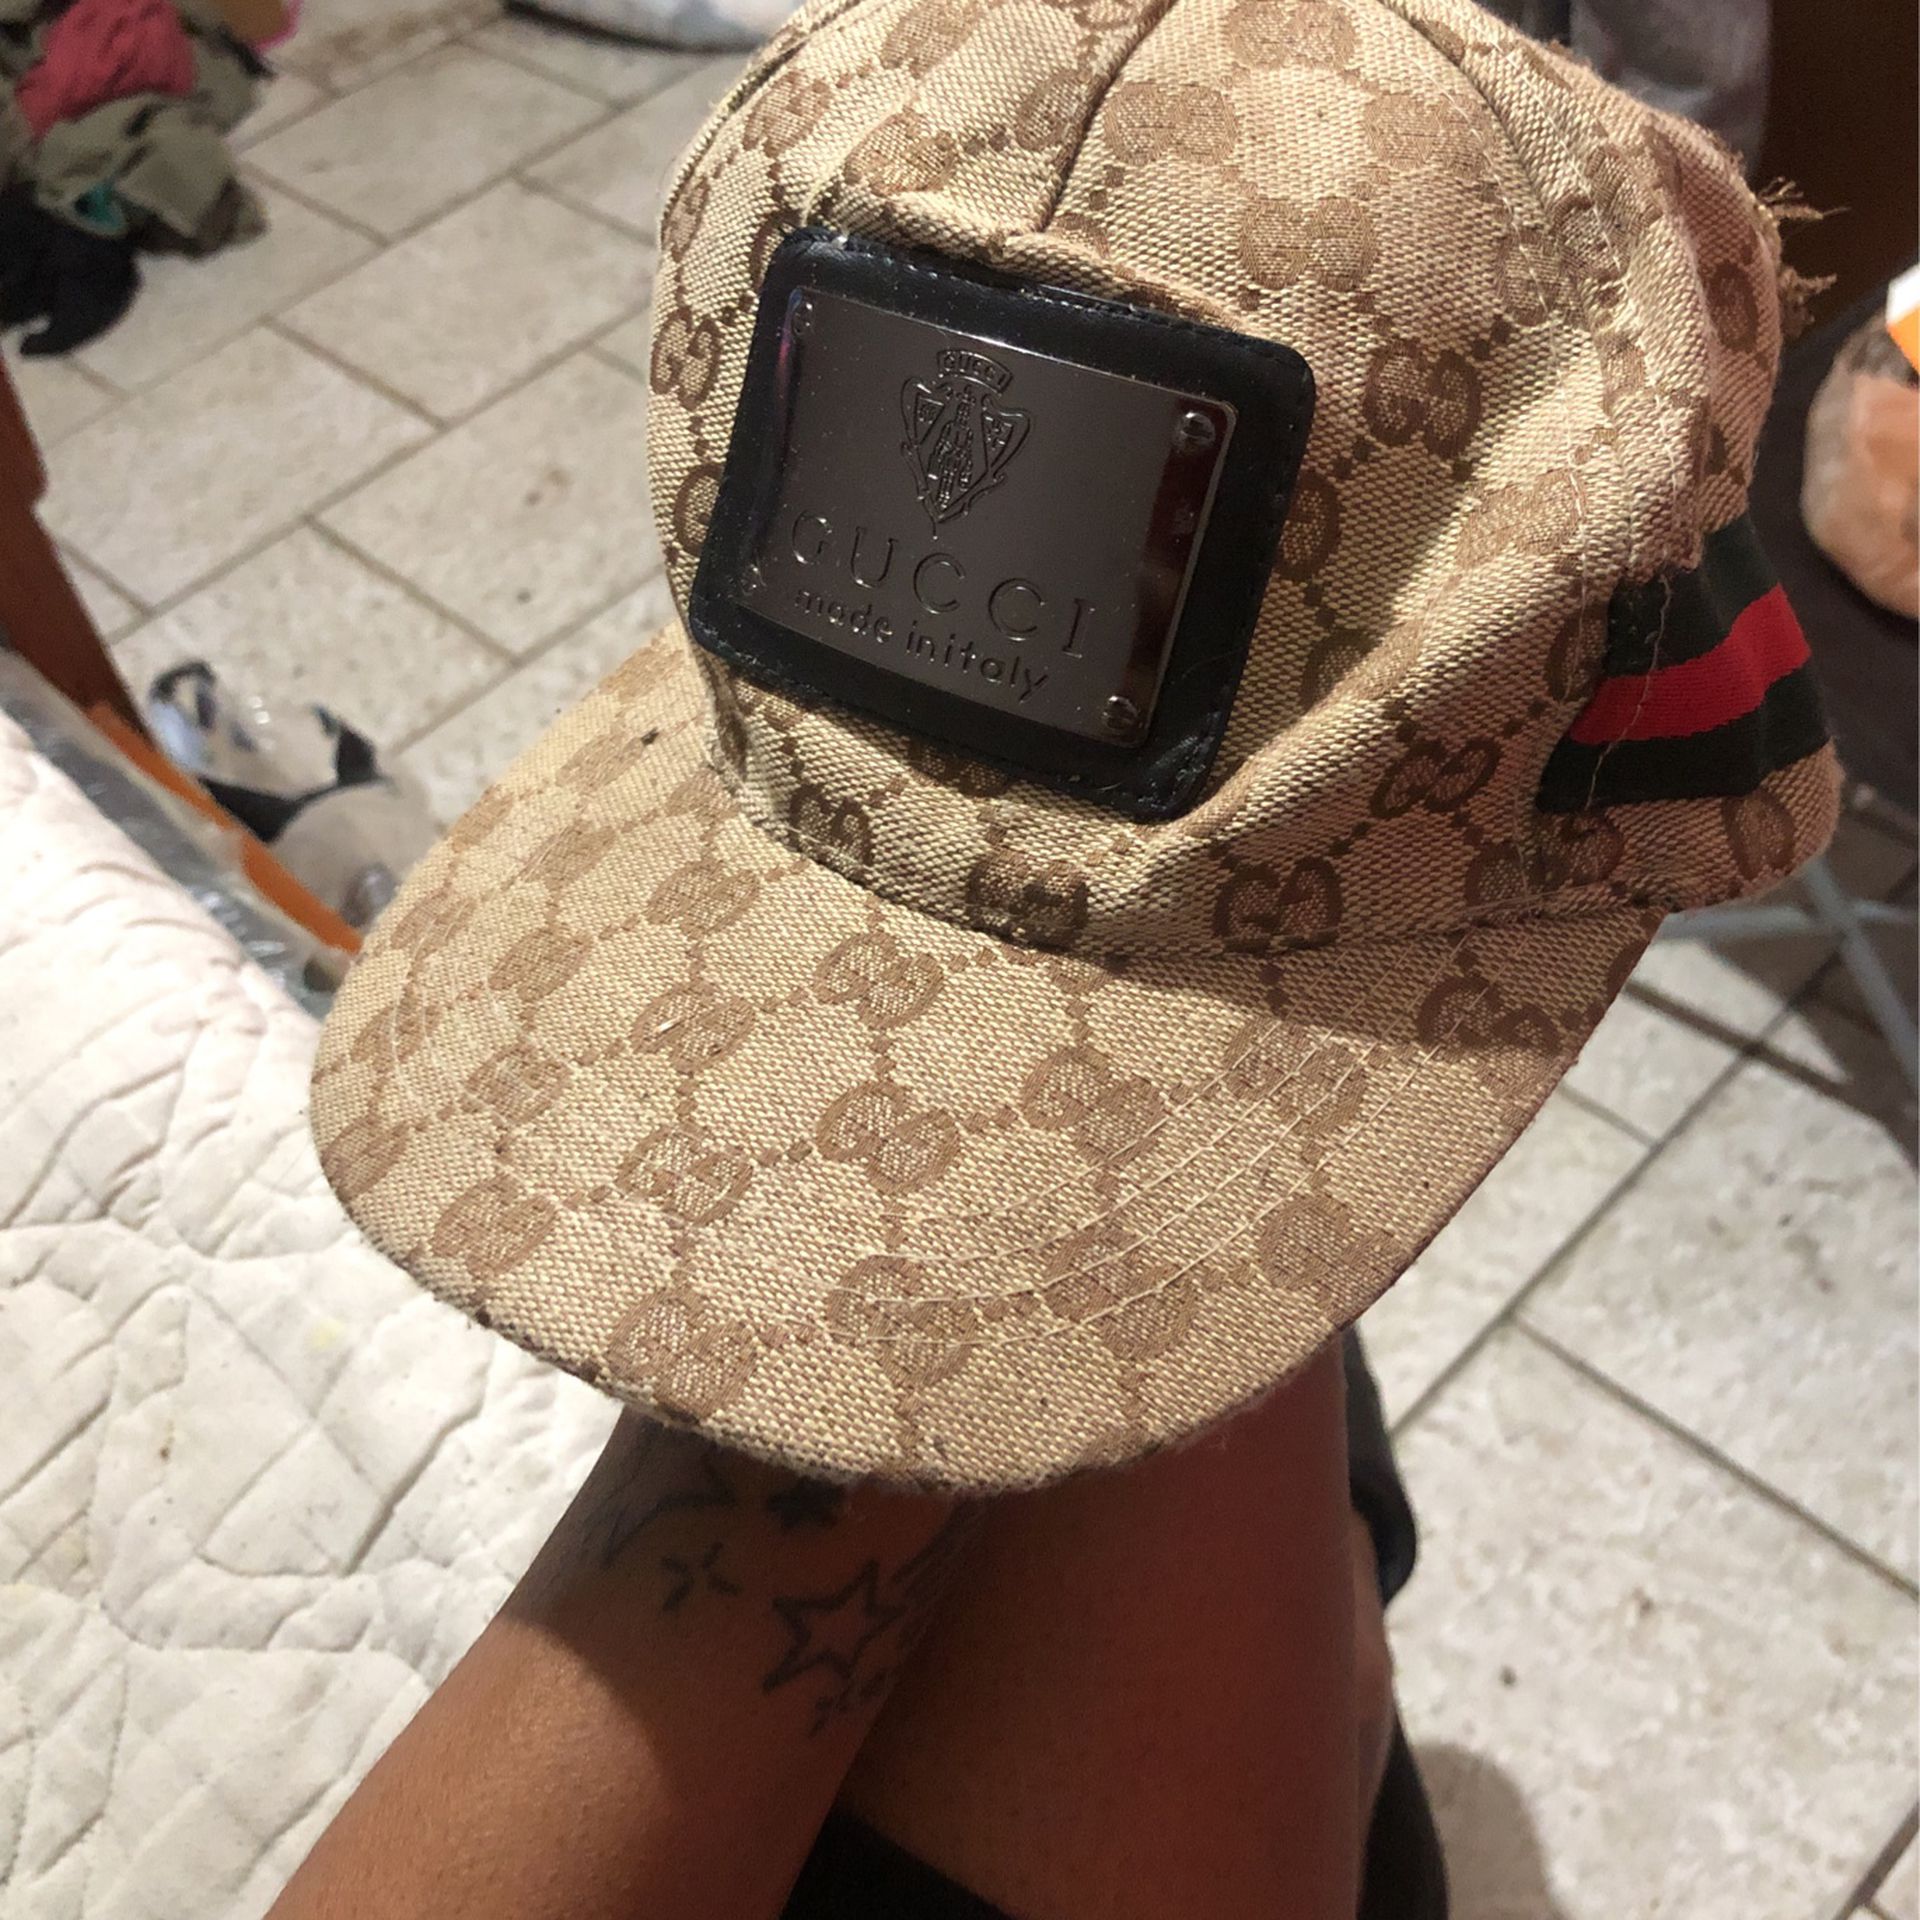 Luis Vuitton And Gucci Hats for Sale in Miami, FL - OfferUp